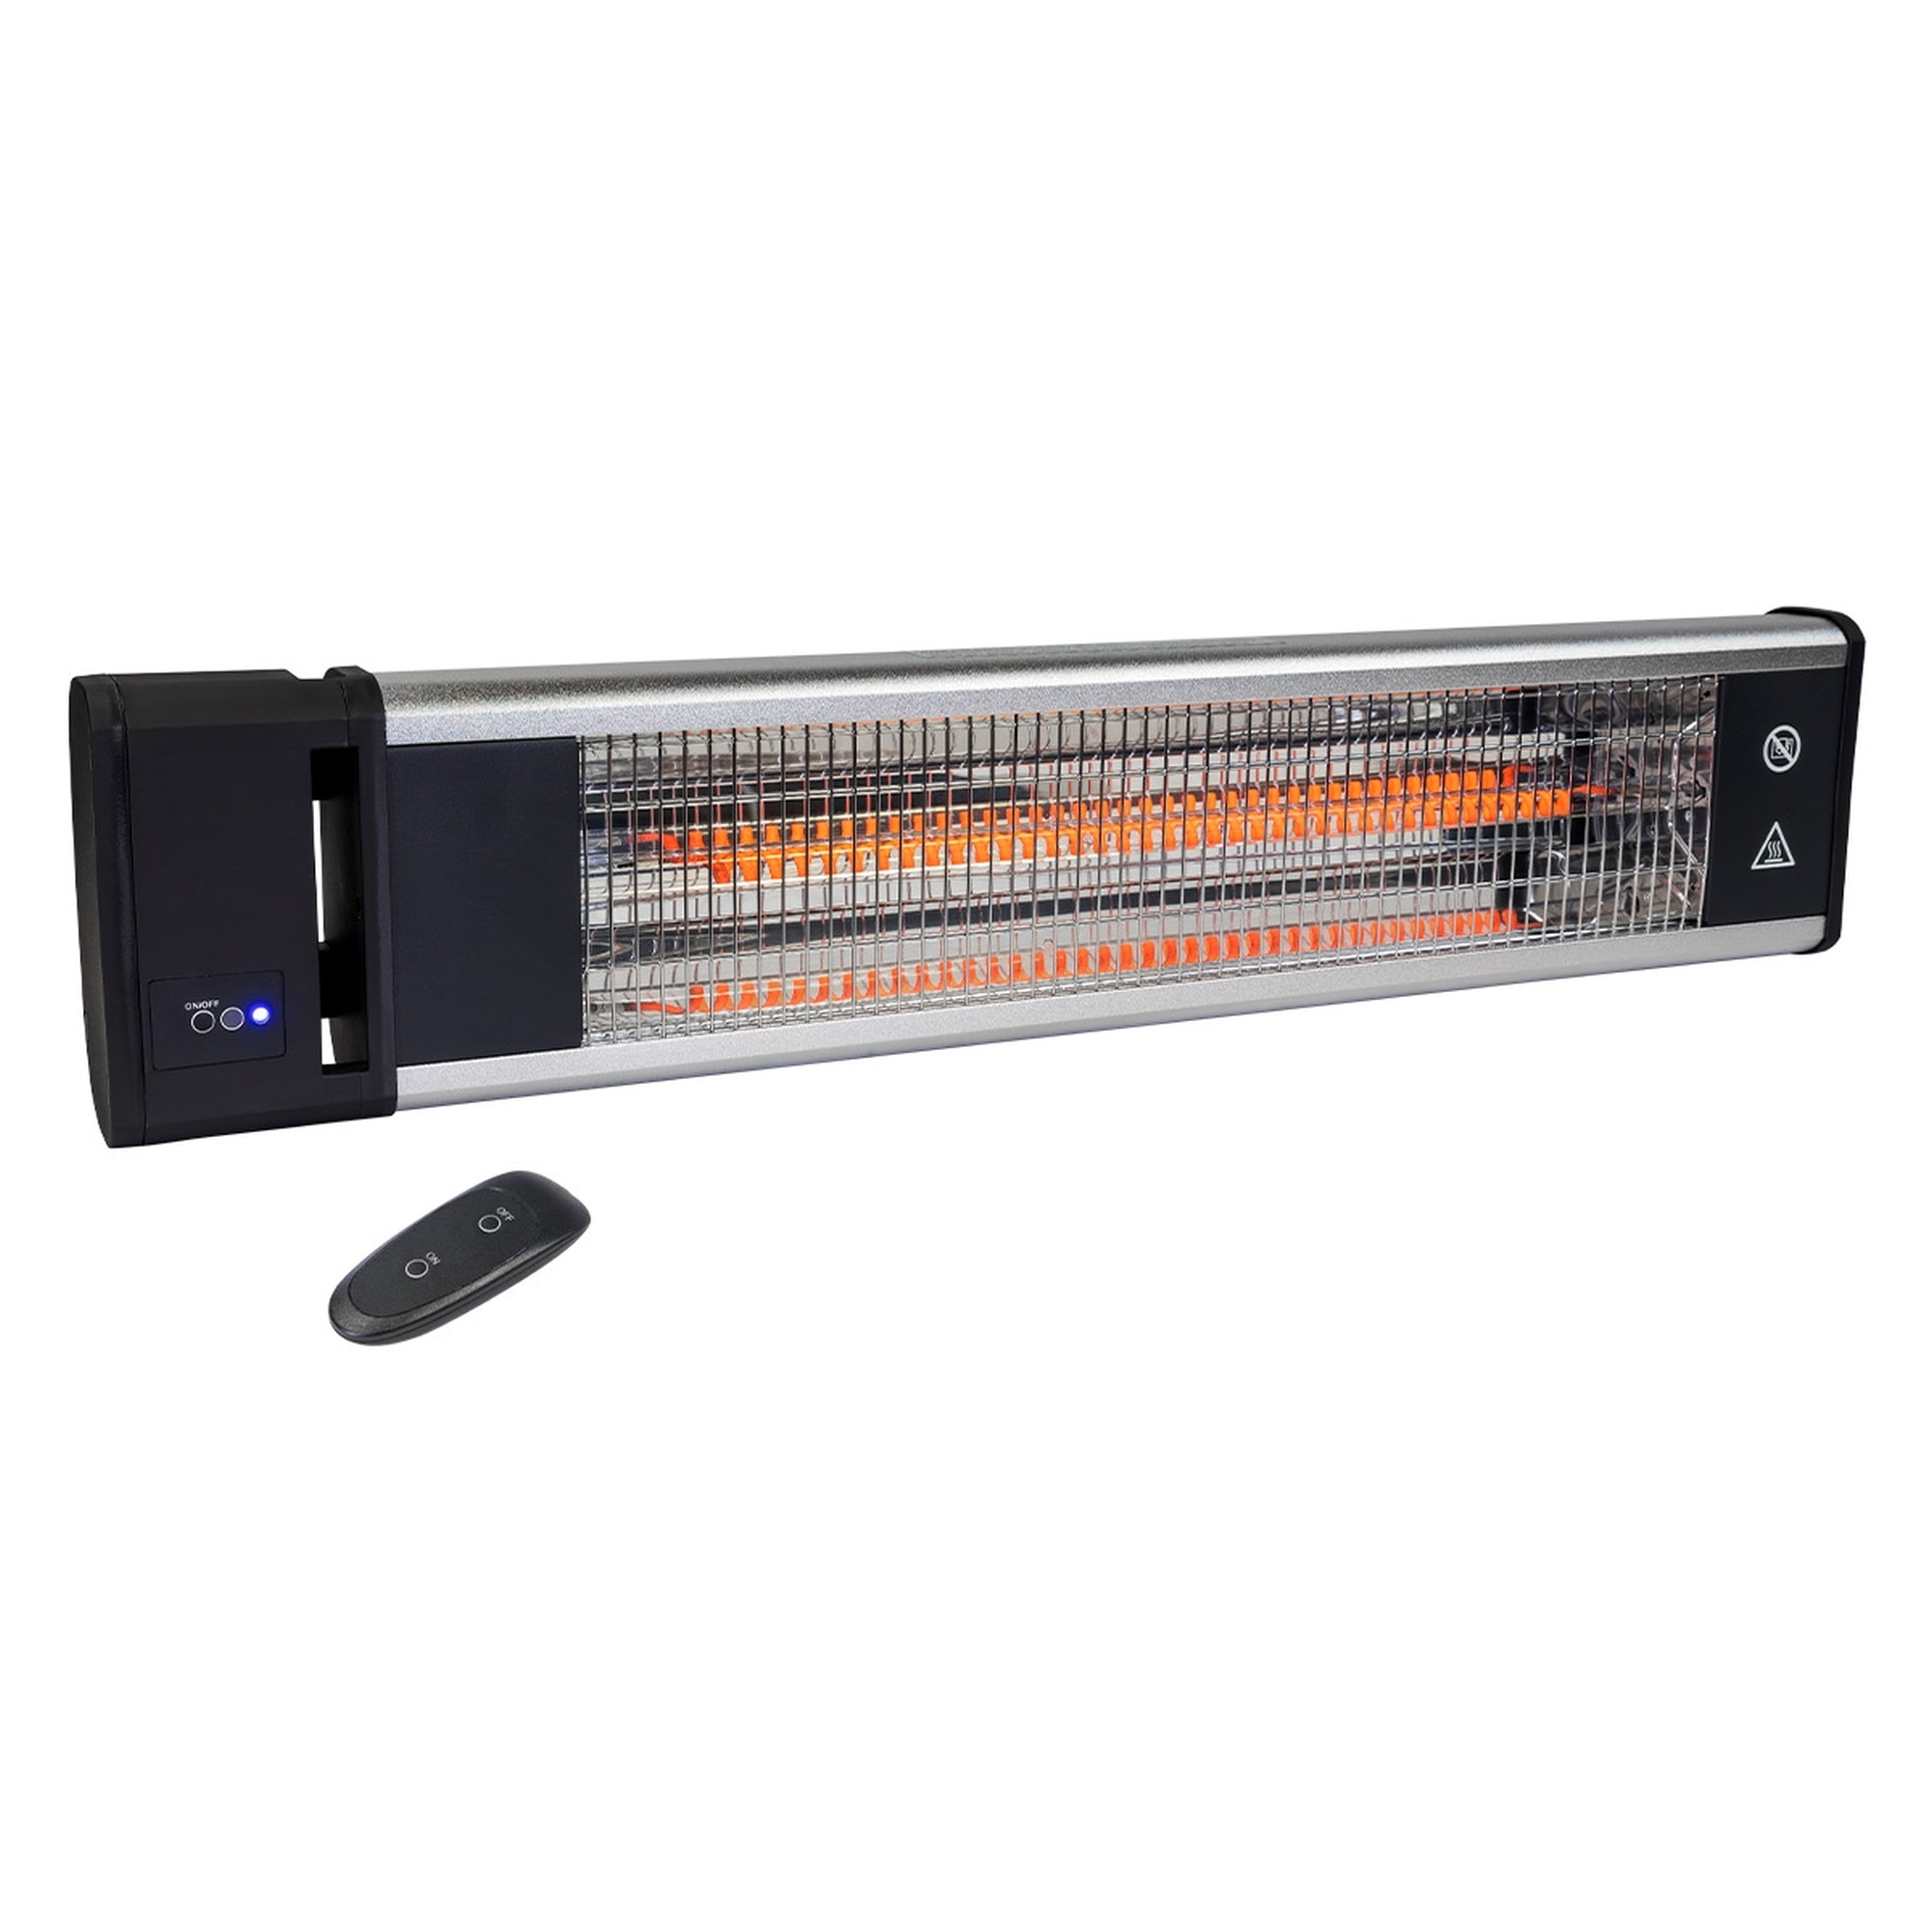 HeTR by Ventamatic, 29Inch Electric Radiant Wall/Ceiling Mount Heater, Fuel Type Electric, Heat Output 5115 Btu/hour, Heat Type Radiant, Model